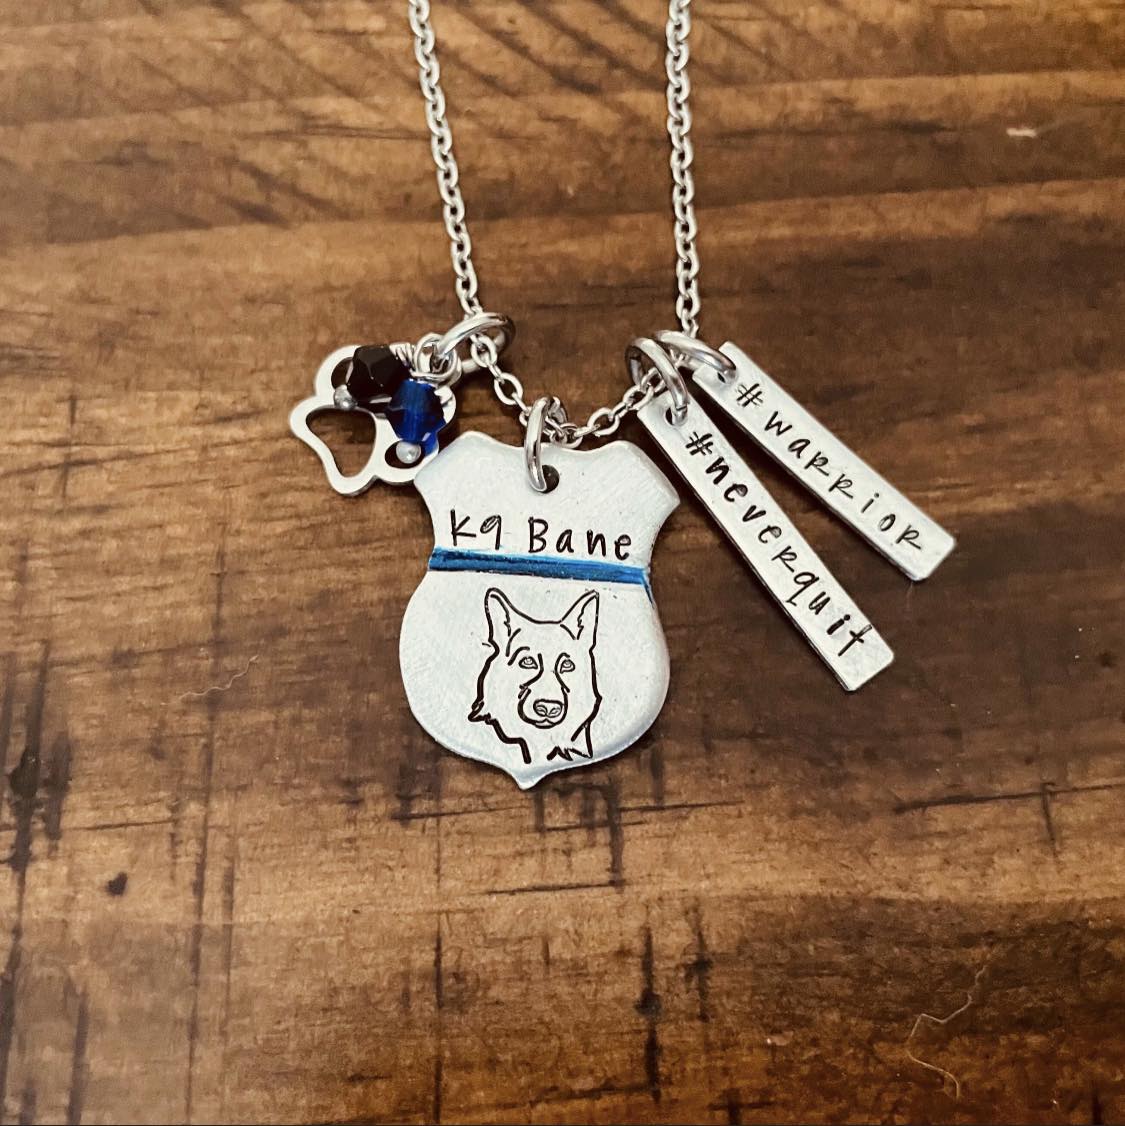 K9 Bane Police shield hand stamped necklace